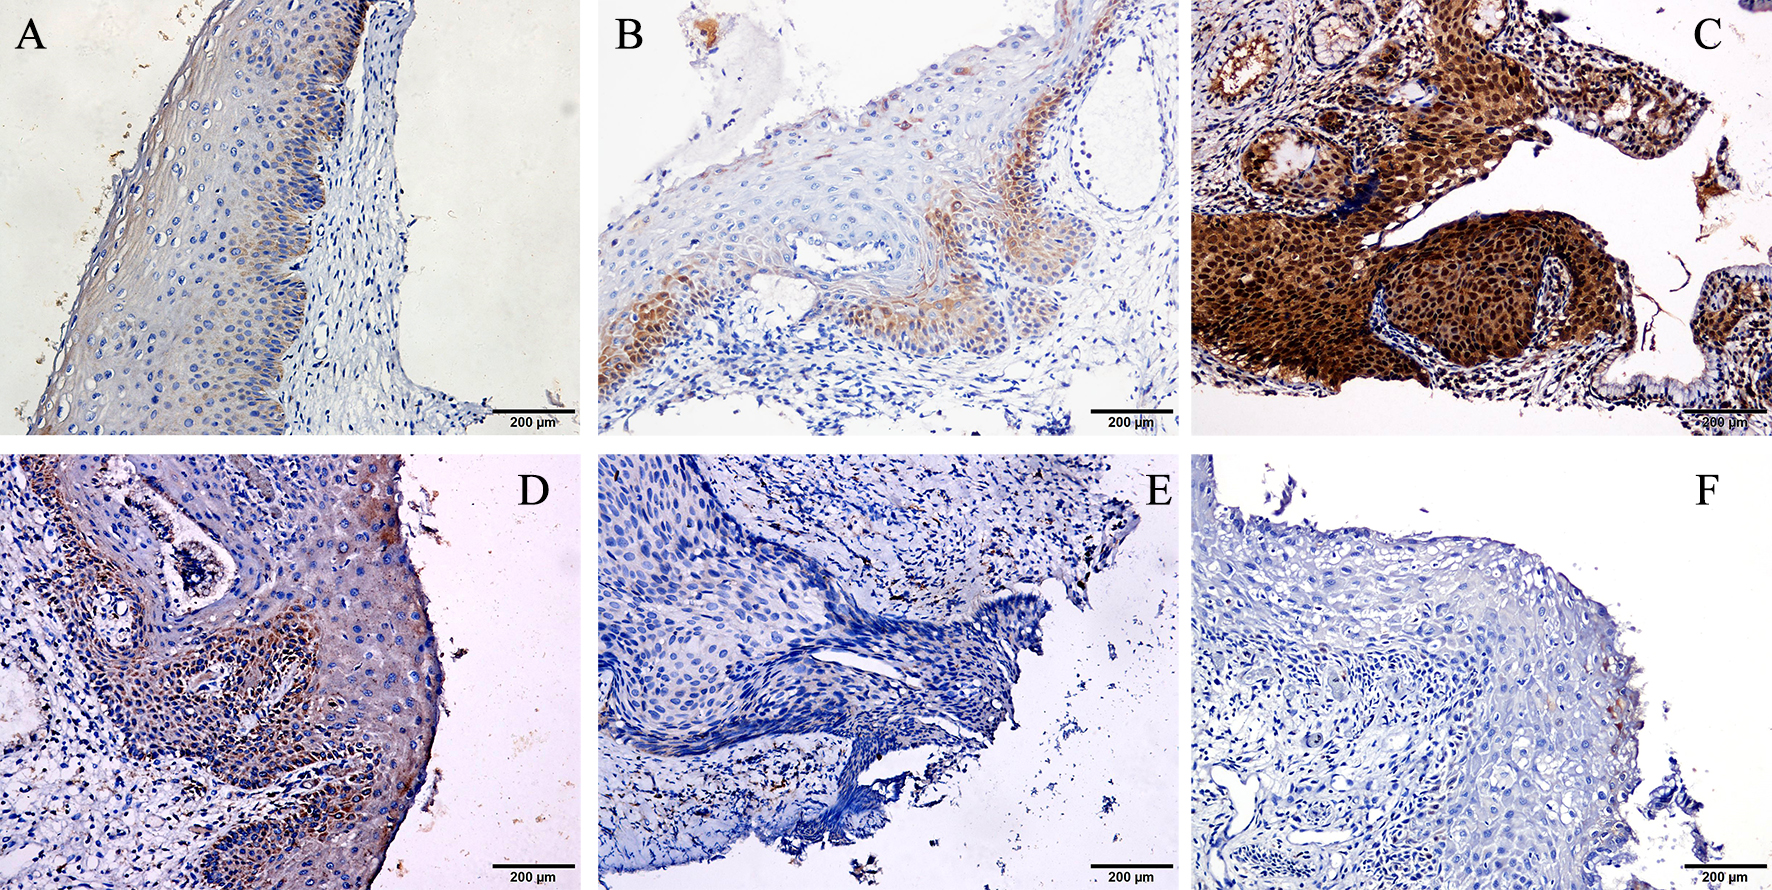 Representative images of immunohistochemistry (IHC) of cervical samples obtained from normal women and patients with cervical intraepithelial neoplasia (CIN). (A) FHIT expression in CIN3 tissue. (B) FHIT expression in CIN1tissue. (C) FHIT expression in normal tissue. (D) C-MYC expression in CIN3 tissue. (E) C-MYC expression in CIN1 tissue. (F) C-MYC expression in normal tissue. Original magnification × 200.